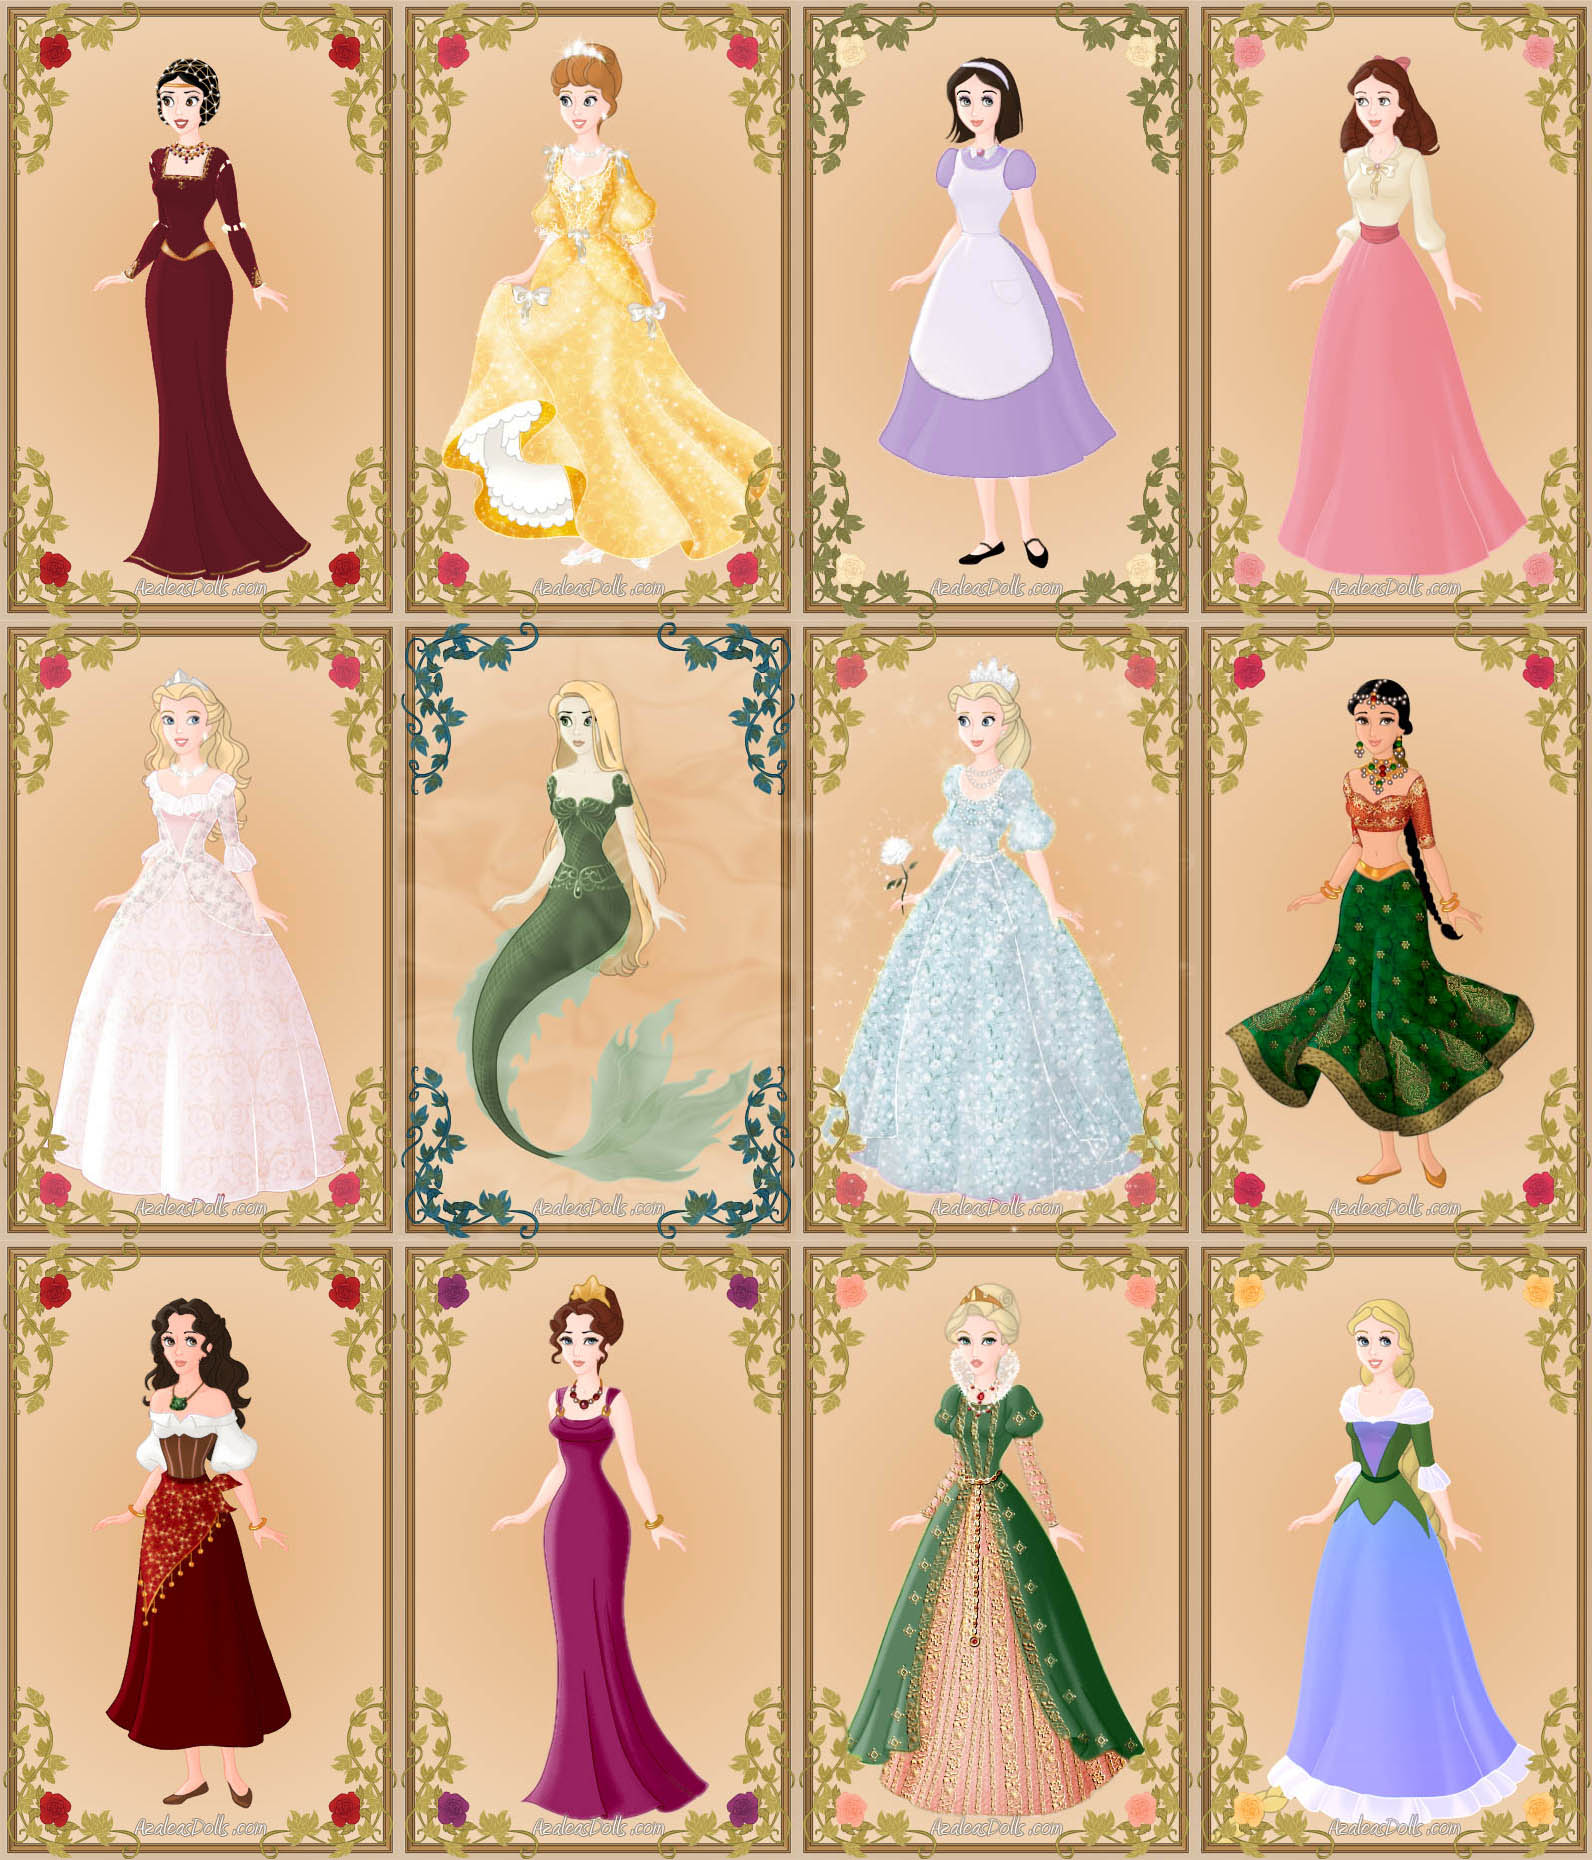 Disney heroines - how they could look by Arrelline on DeviantArt